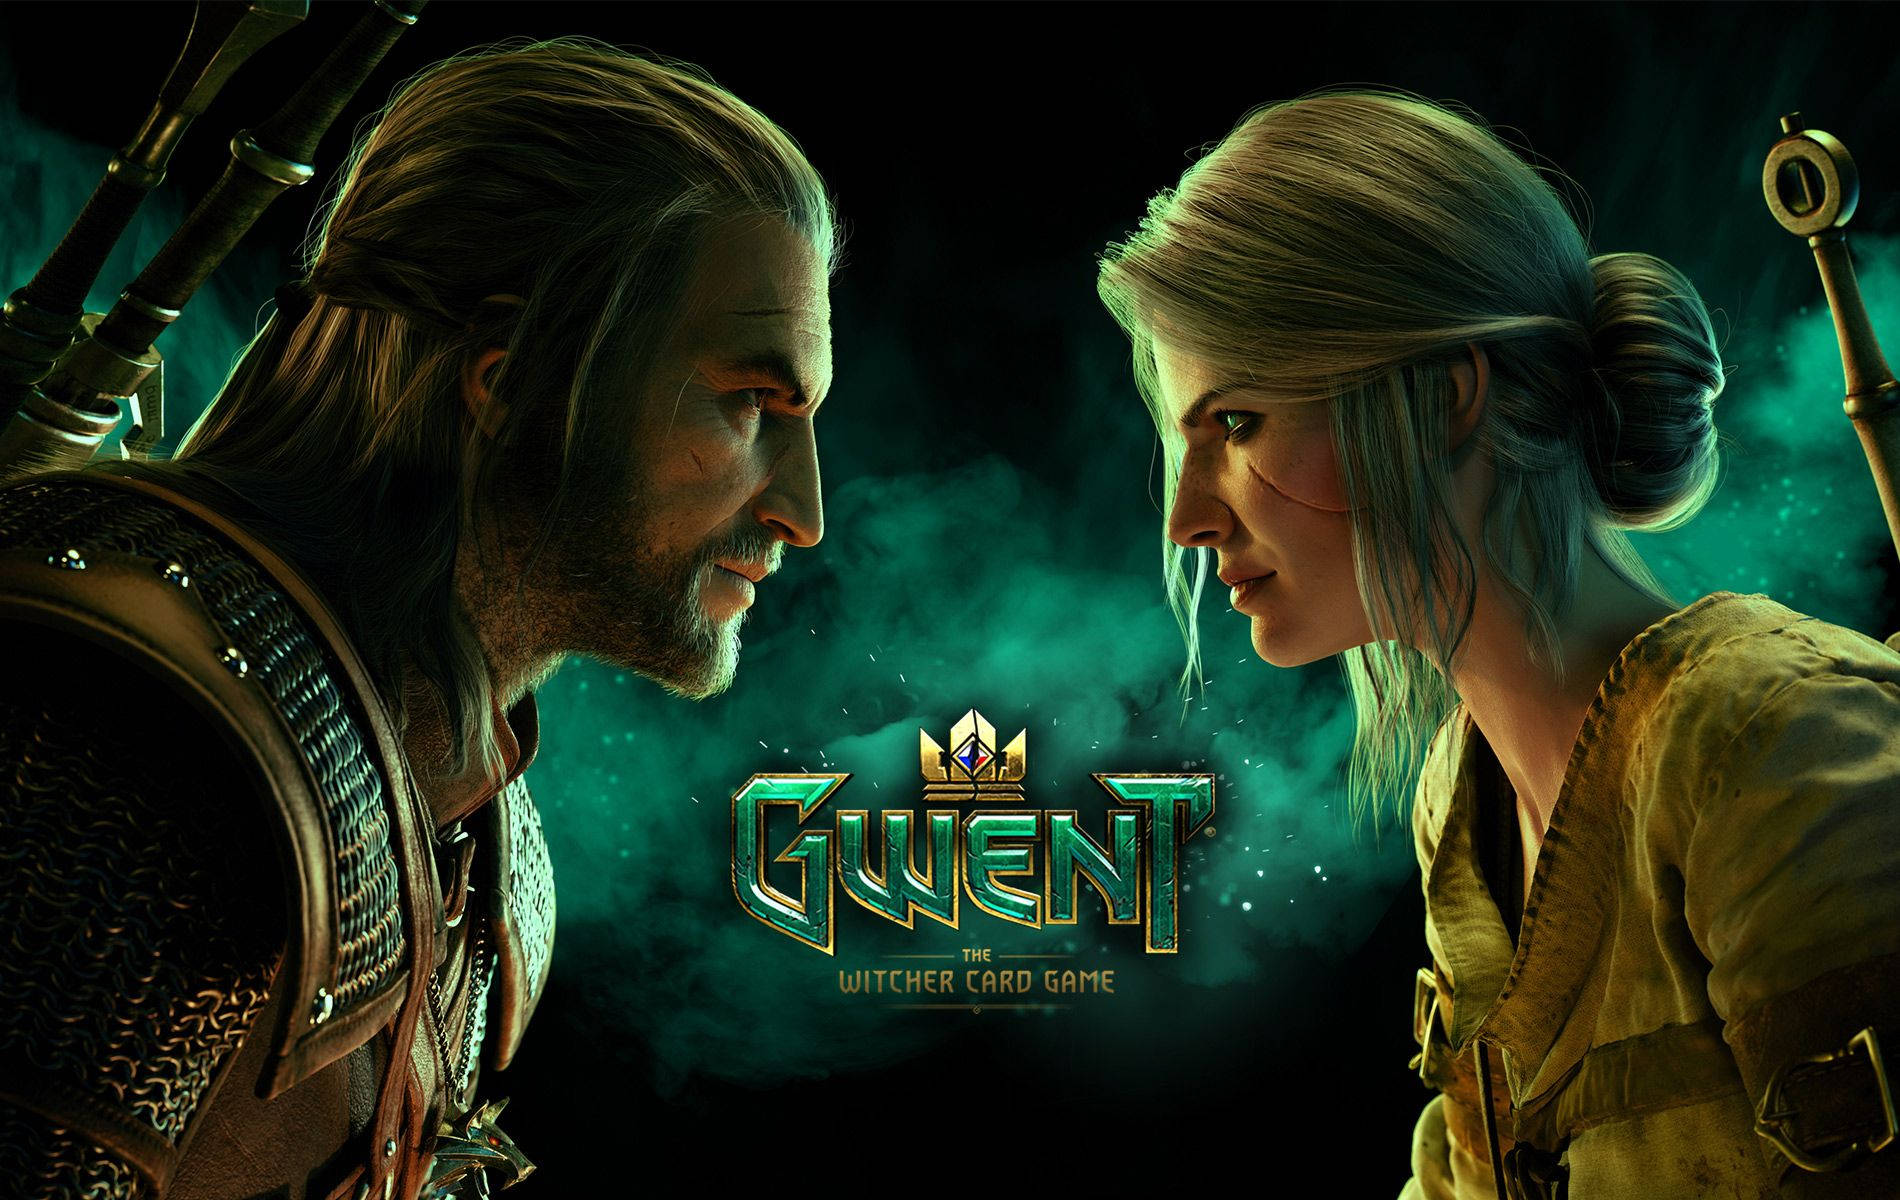 GERALT AND CIRI -Two beloved characters from The Witcher come together in this intense poster Wallpaper